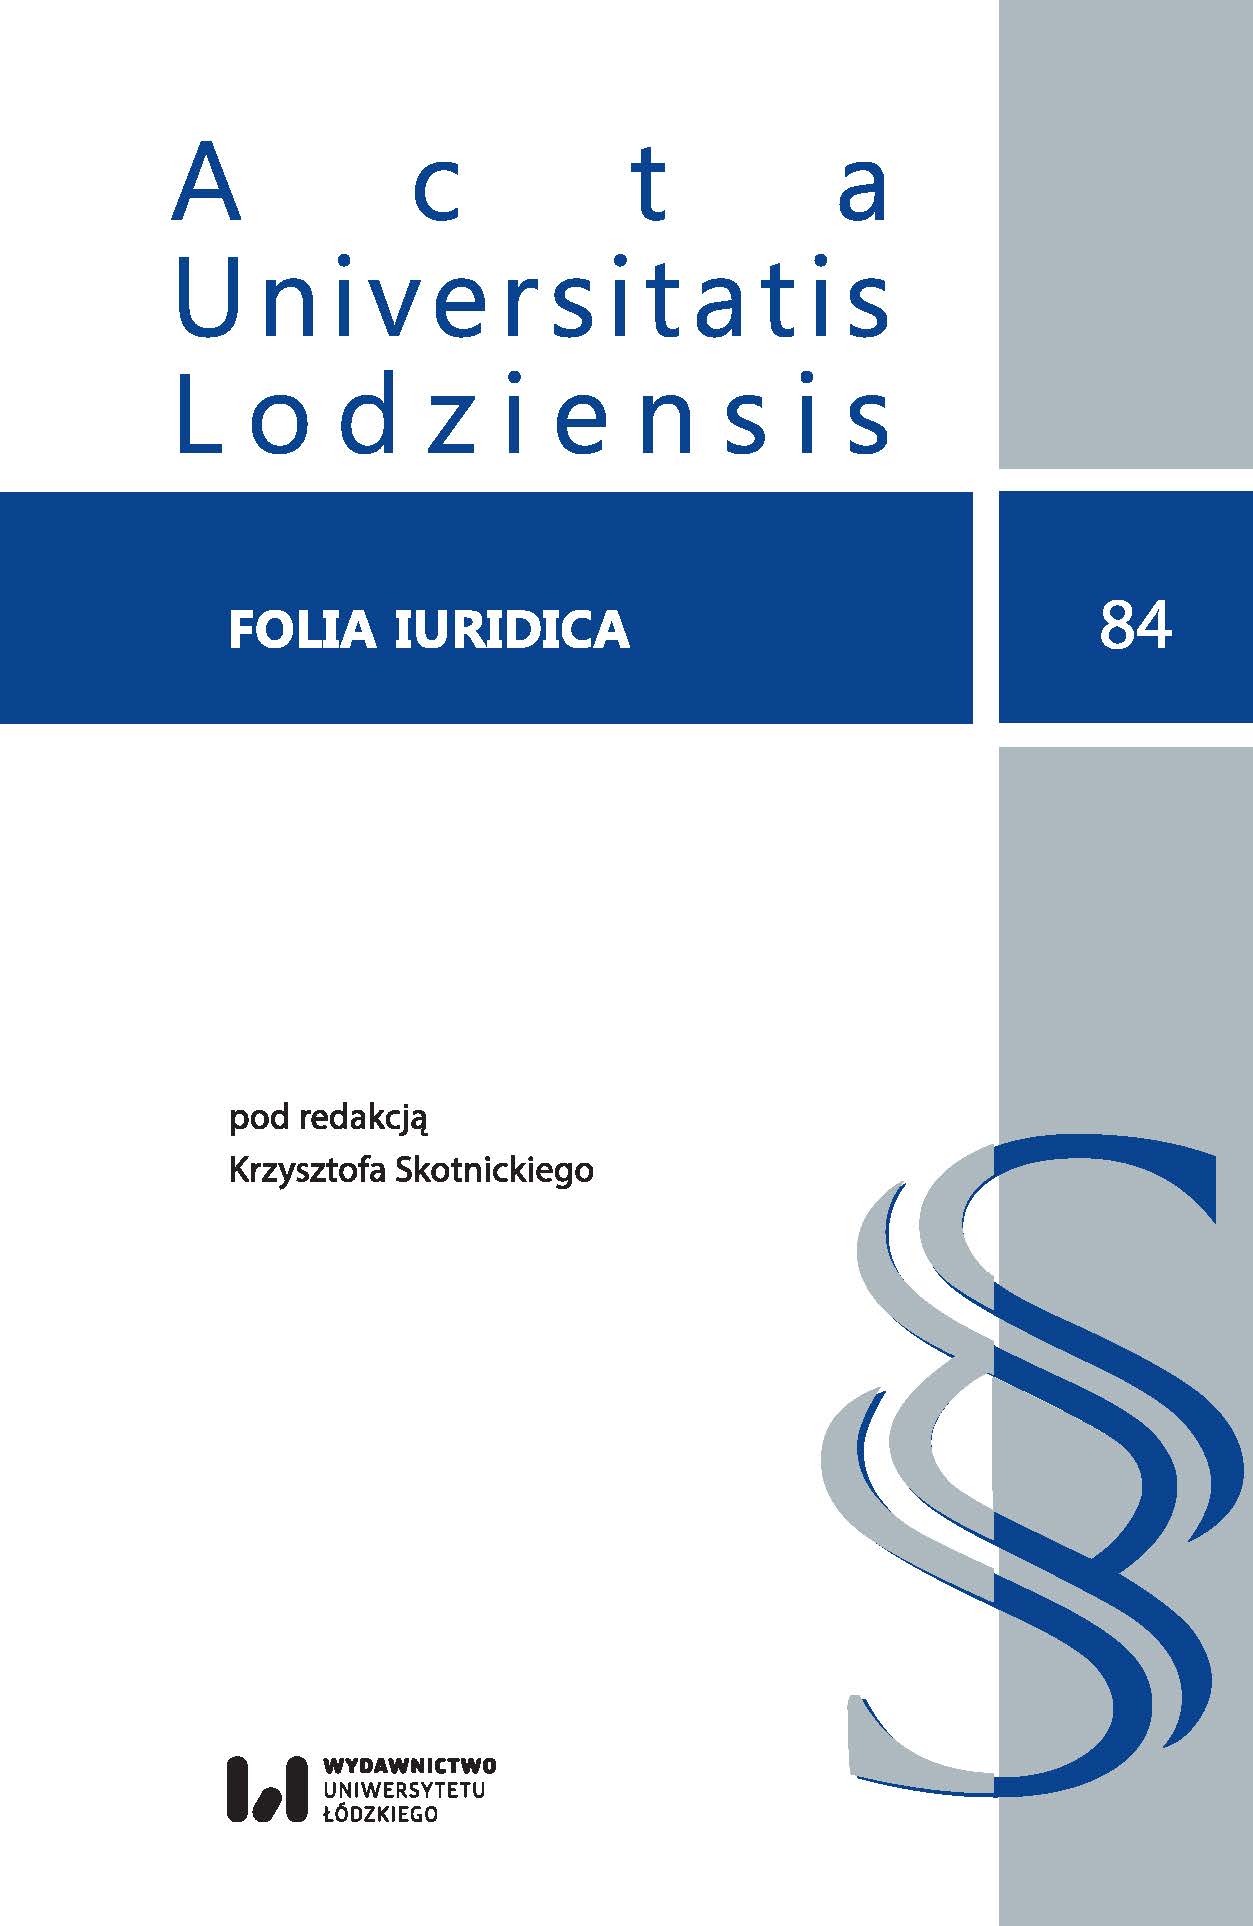 The presidency of the Czech Republic in the first half of 2009 as an example of an effective management of the European Union Cover Image